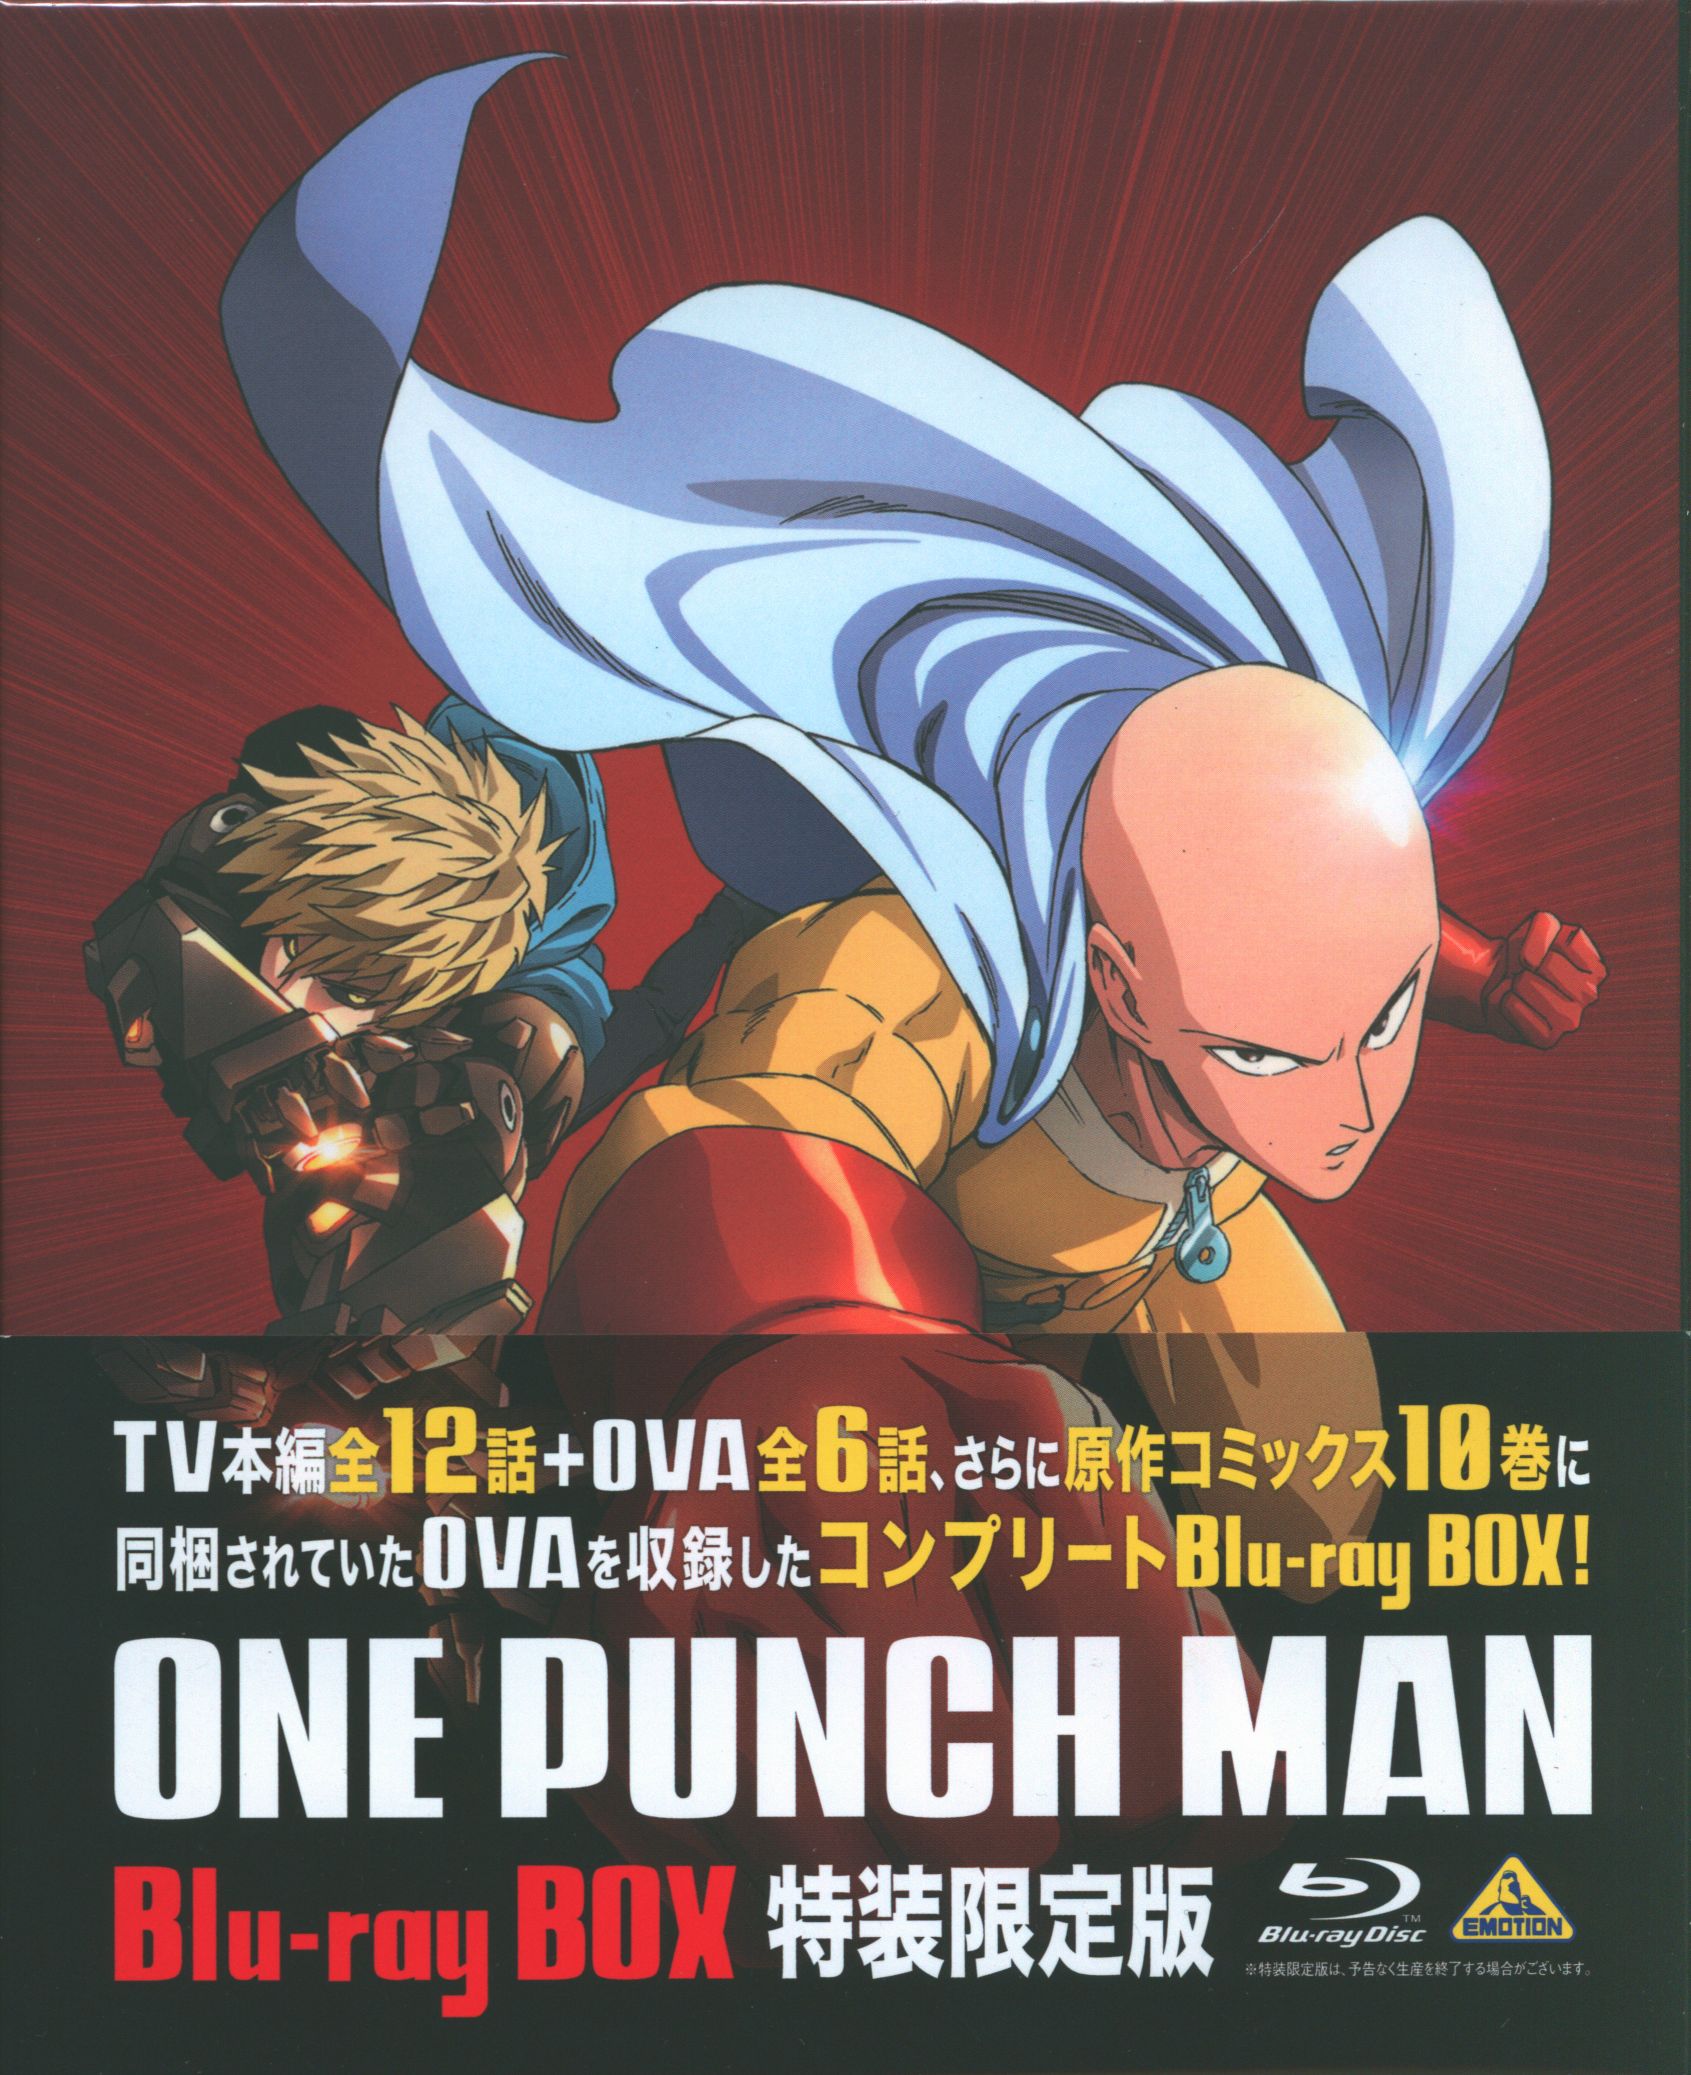 Anime Blu-ray Unopened One Punch Man Special Limited Edition Blu